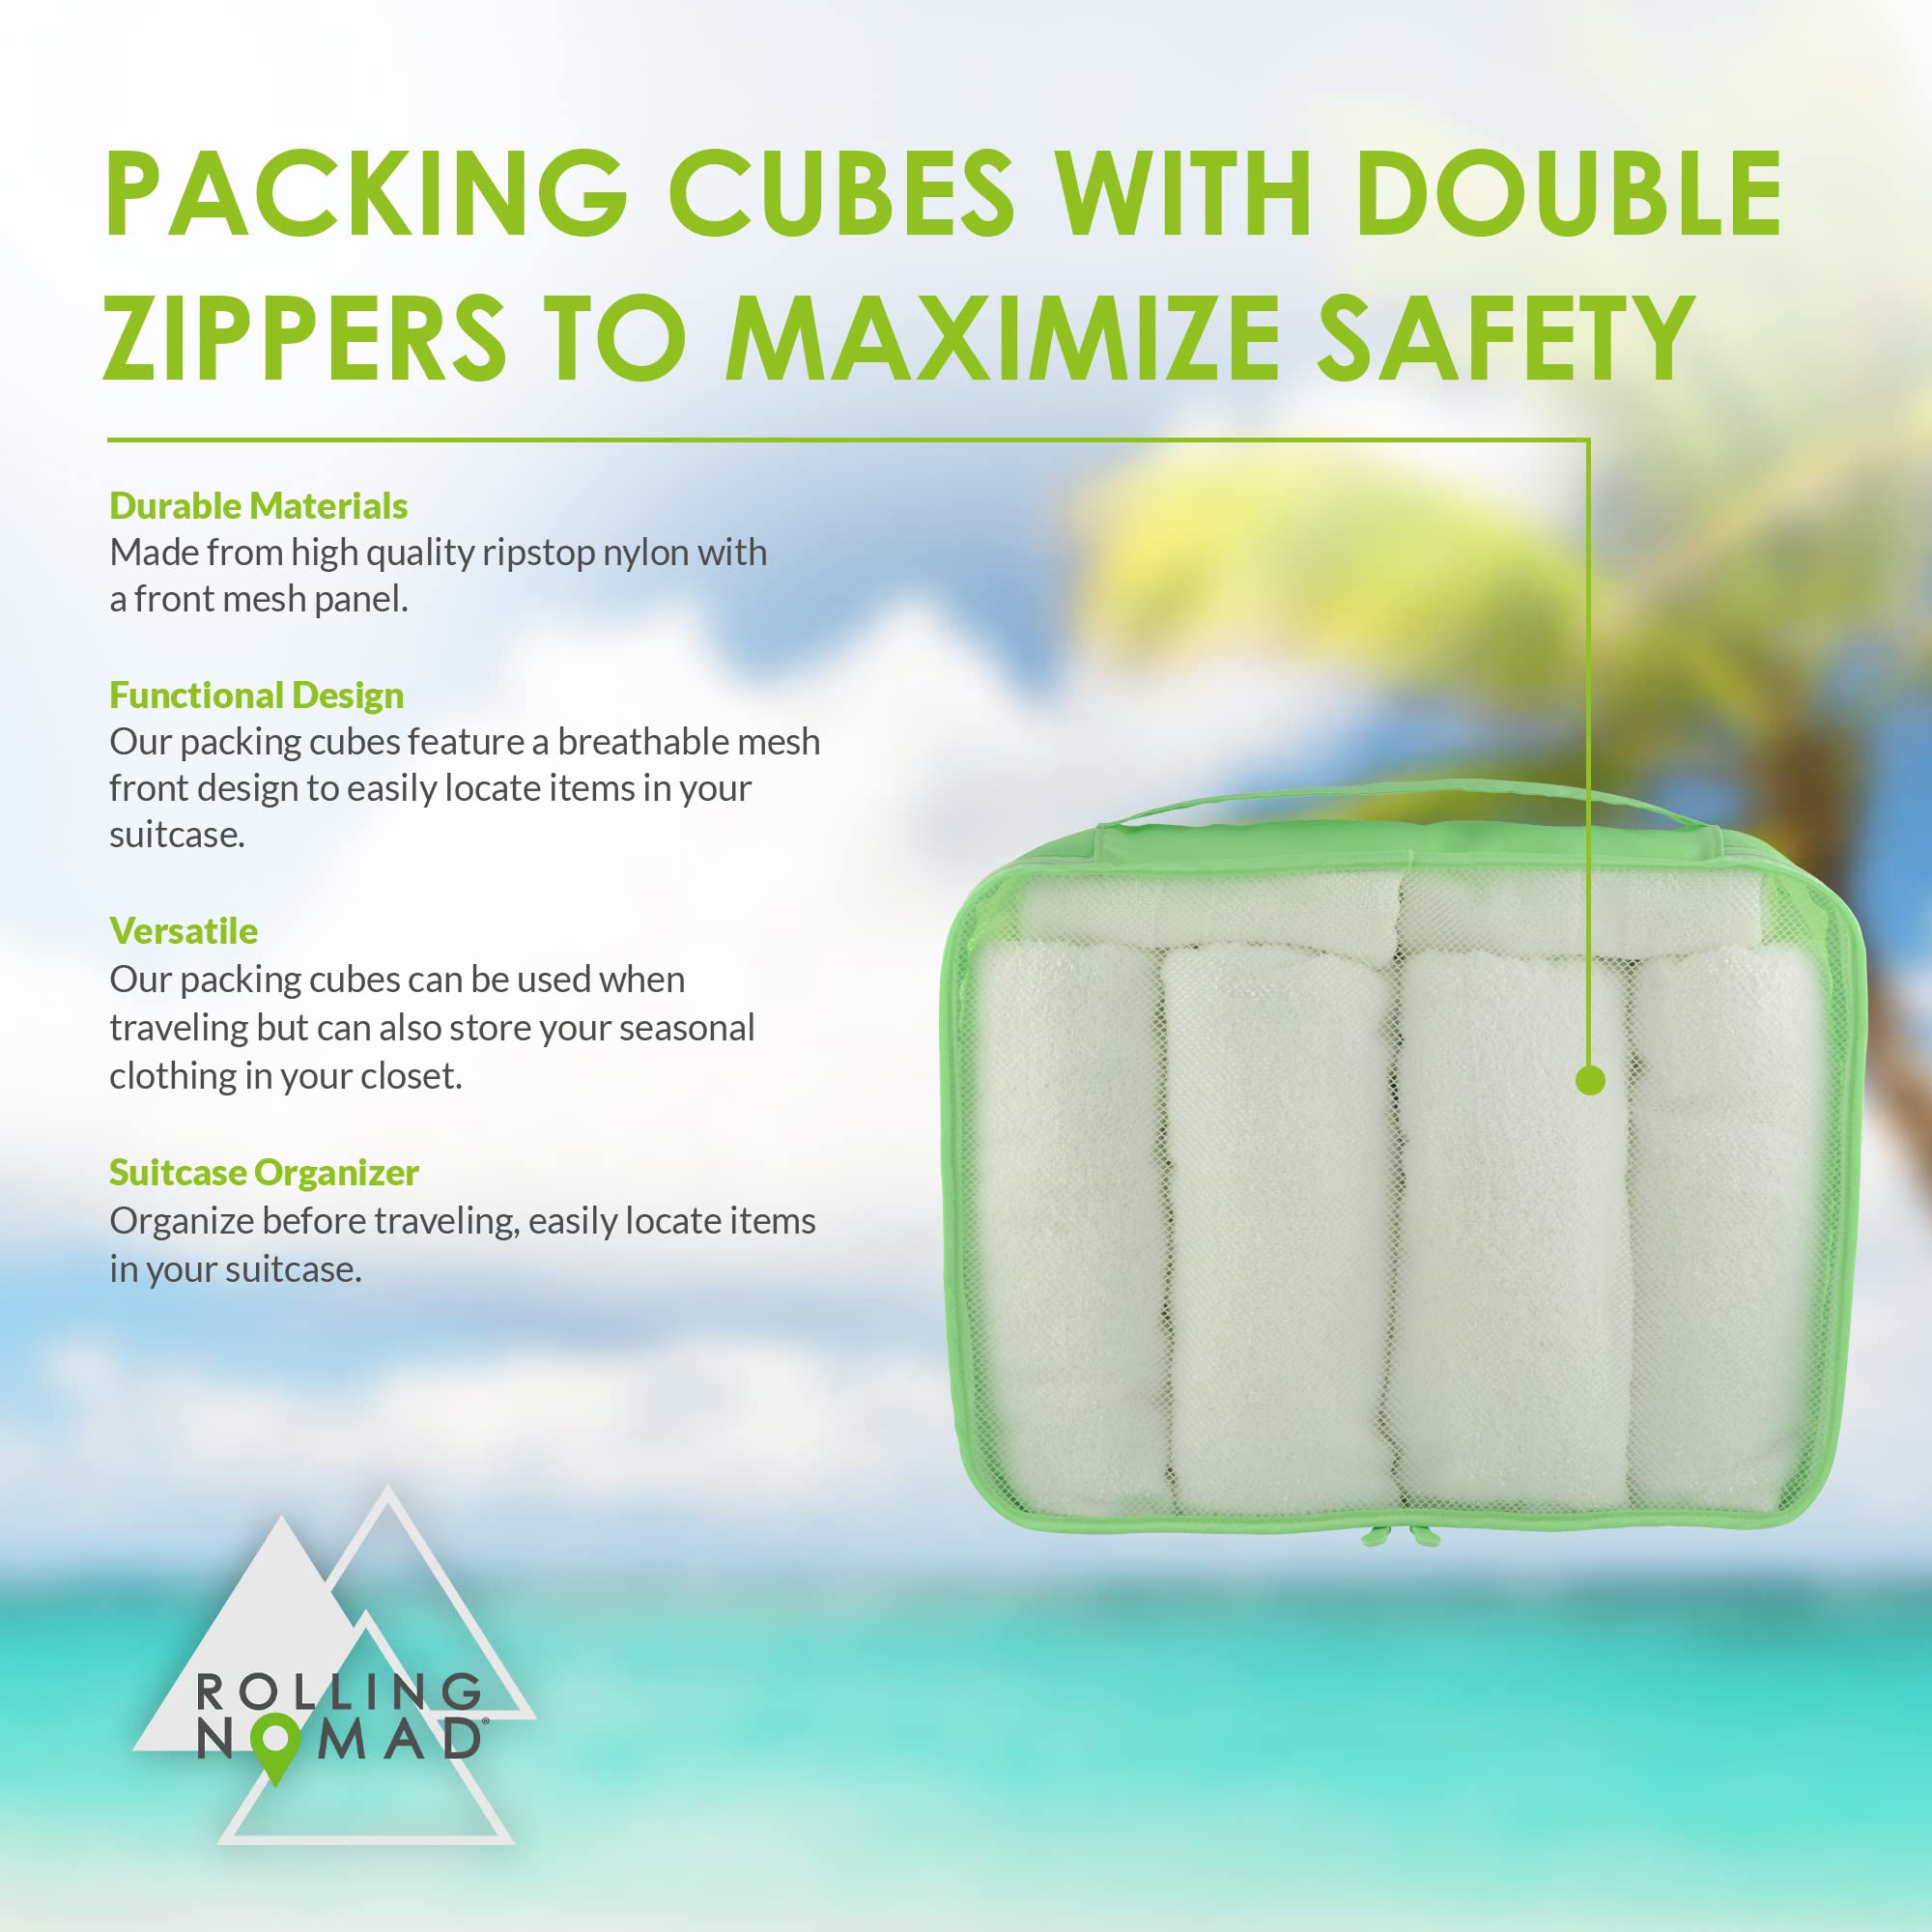 Large Packing Cubes - 4 Set Mesh Green Packing Cubes for Travel, Luggage Organizer Bags, Travel Essentials, Vacation Must Haves for Accessories, Suitcase Storage, Clothes, Shoes, Laundry 17.5x4x12.75  - Like New